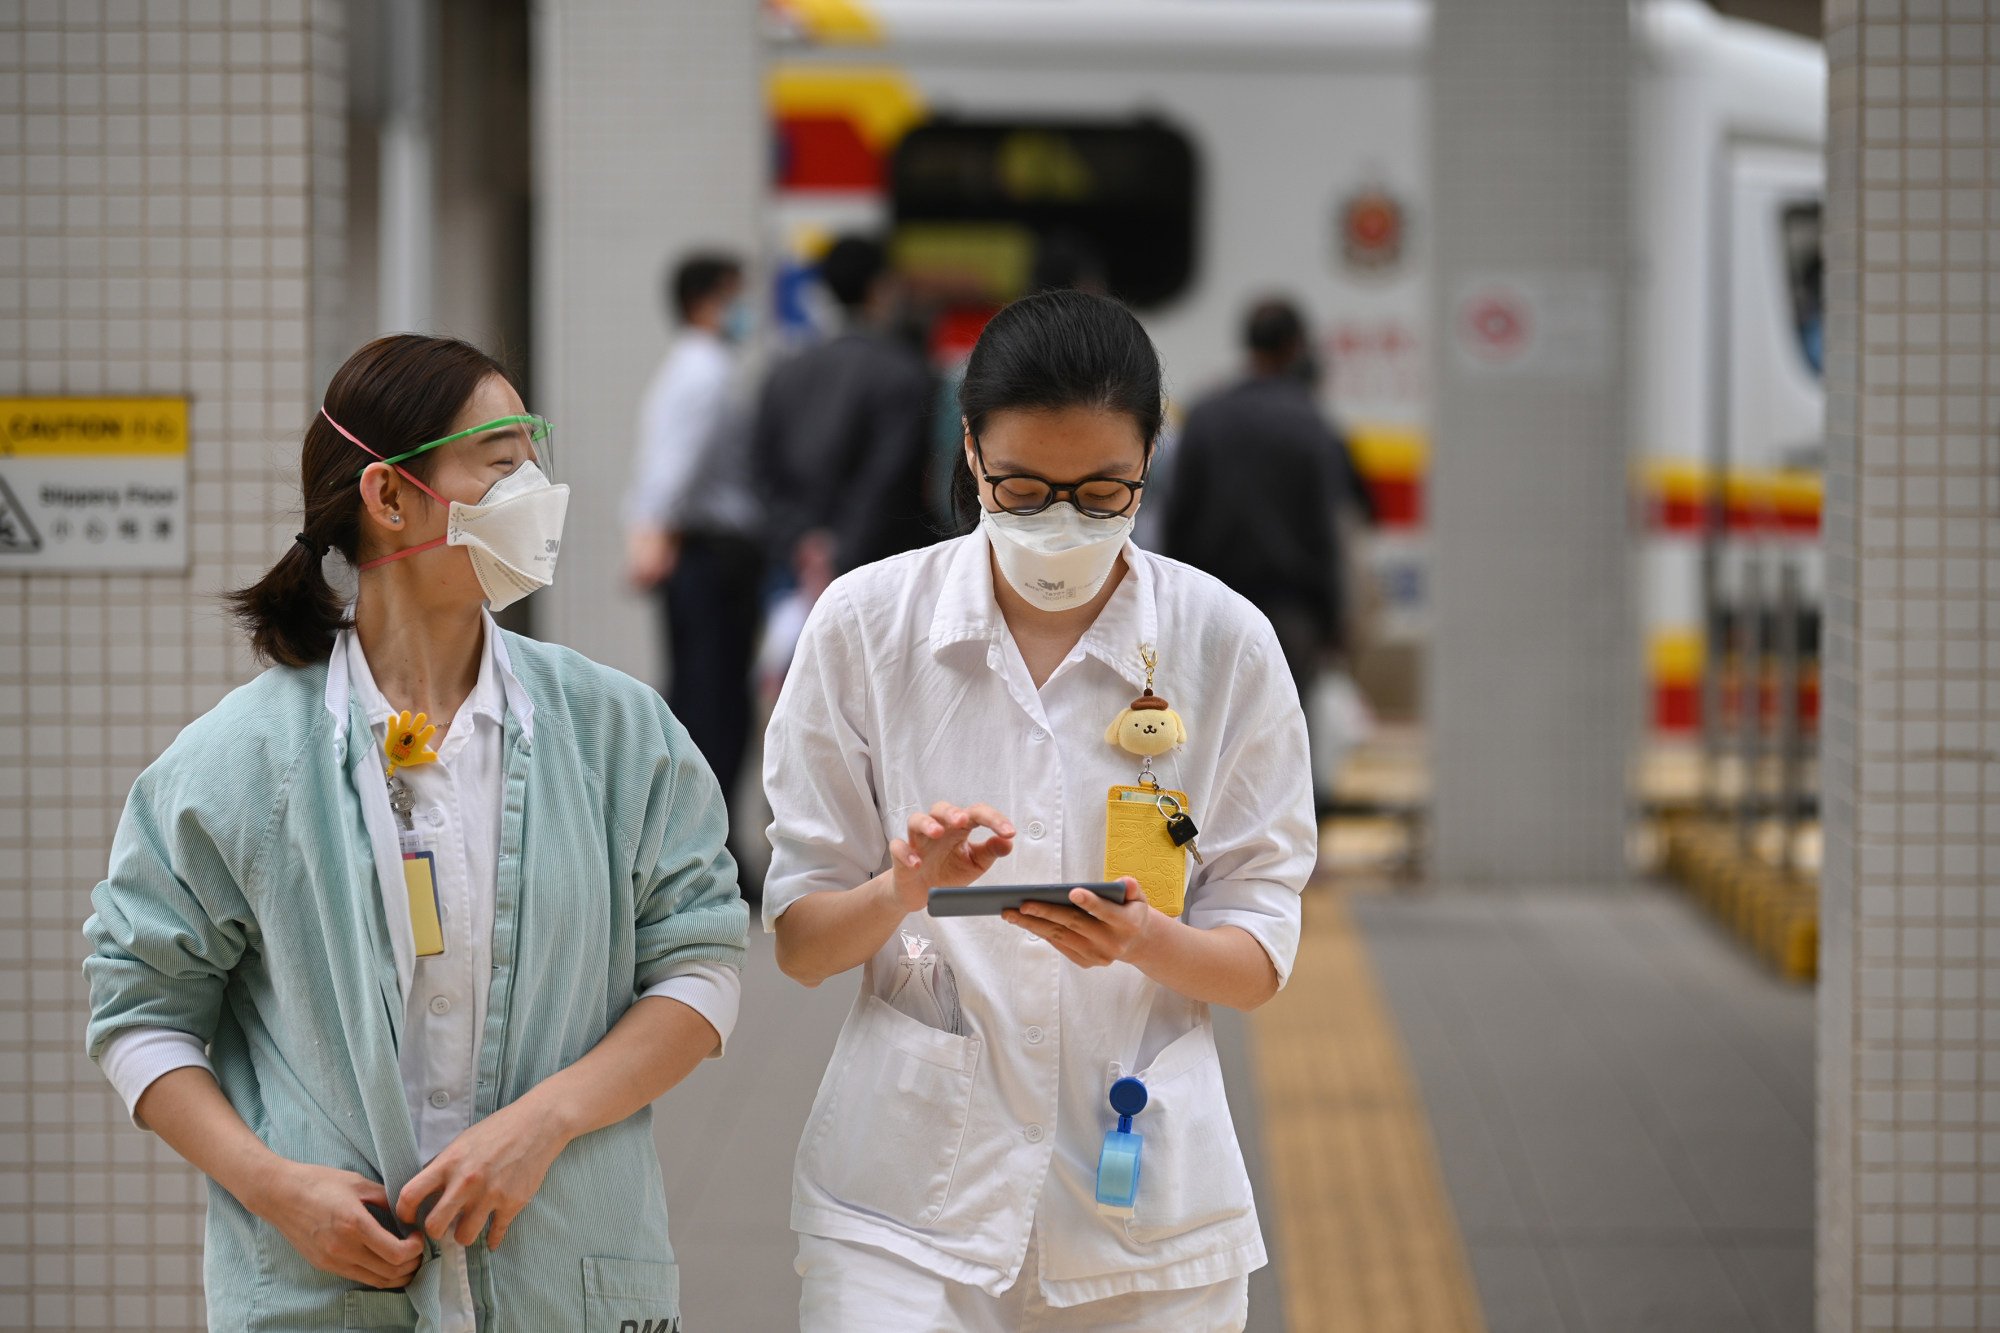 third medical school for hong kong: a boost for biomedical hub ambitions, but will it ease shortage of doctors?